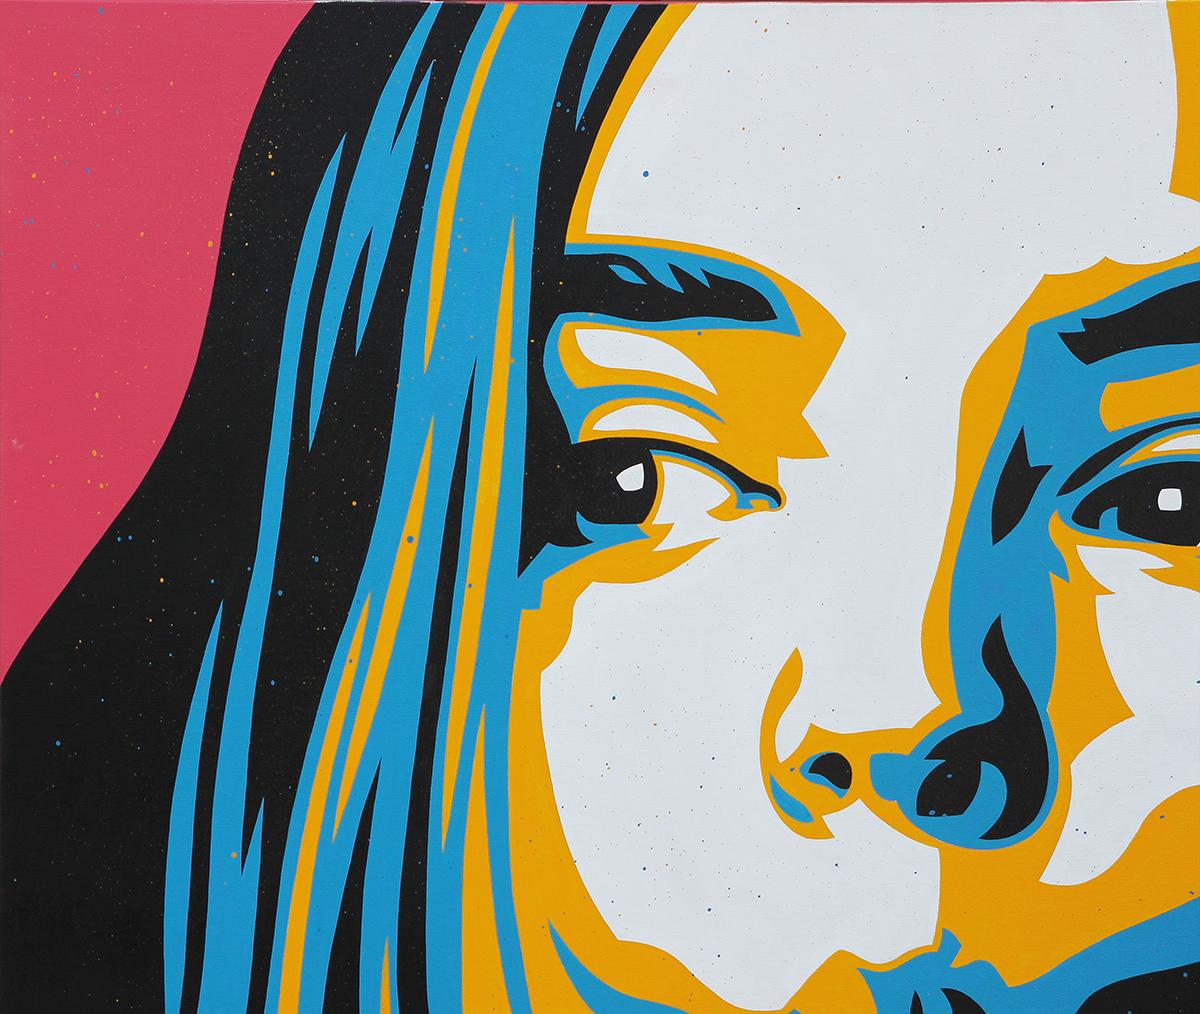 Abstract contemporary painting of a young woman with by Austin, Texas artist Ed Booth. Large yellow, blue, and black vectorized portrait painting of a woman subject against a solid magenta pink background. Signed by artist at the bottom left.